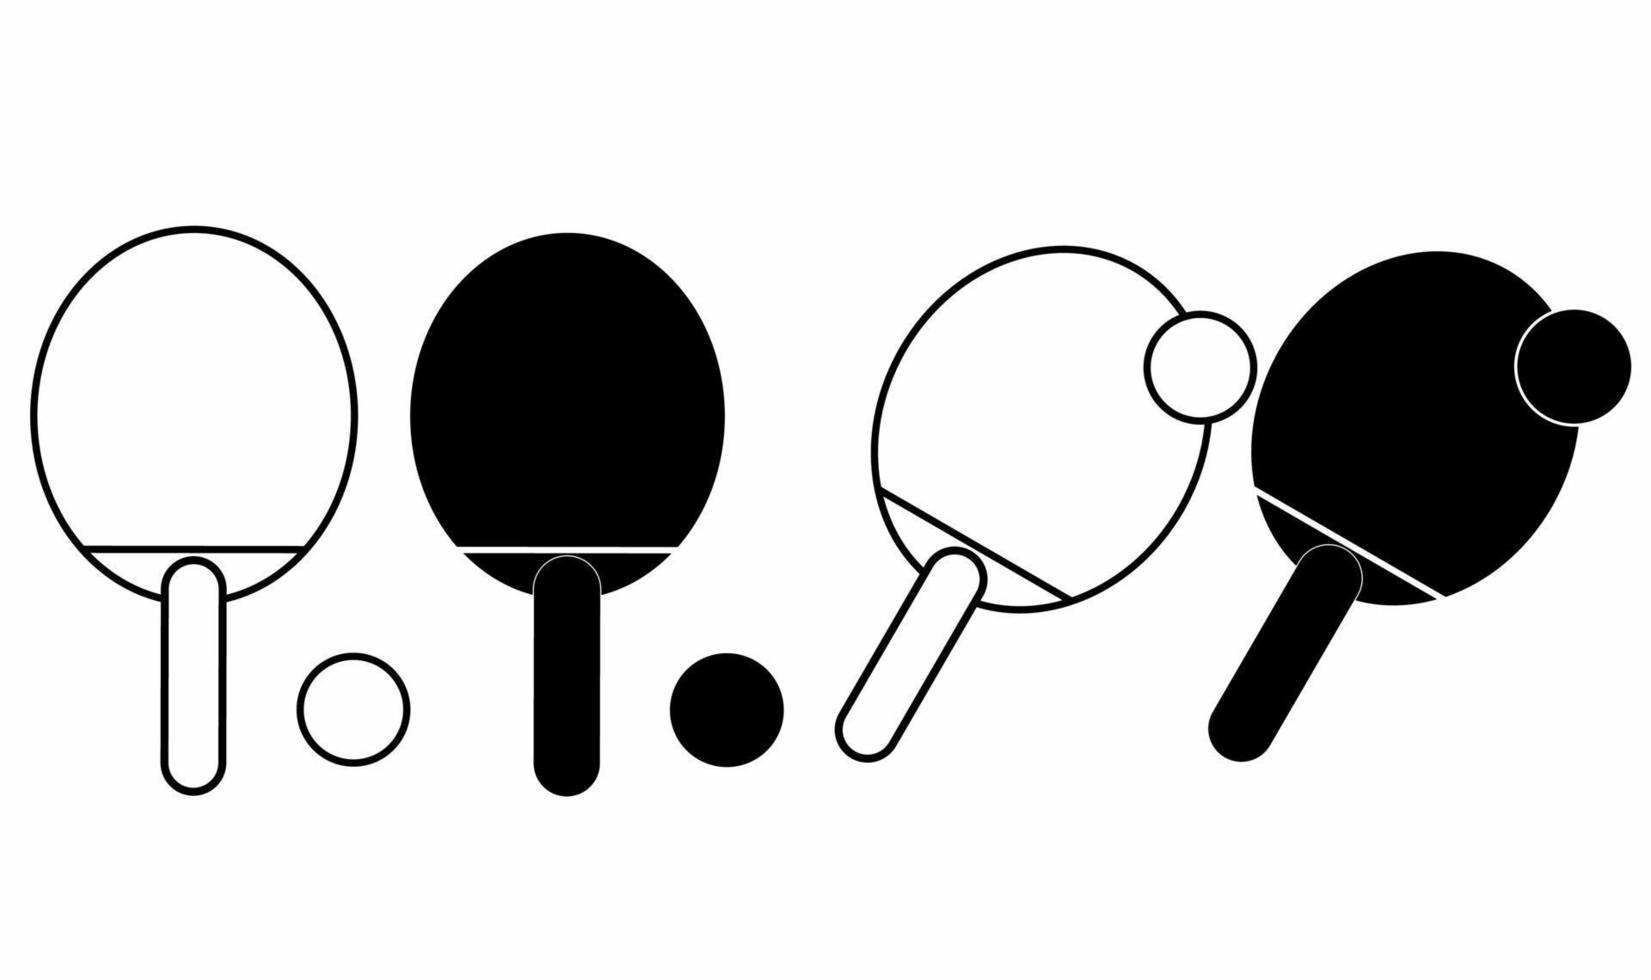 outline Silhouette ping pong rackets and ball icon set isolated on white background vector